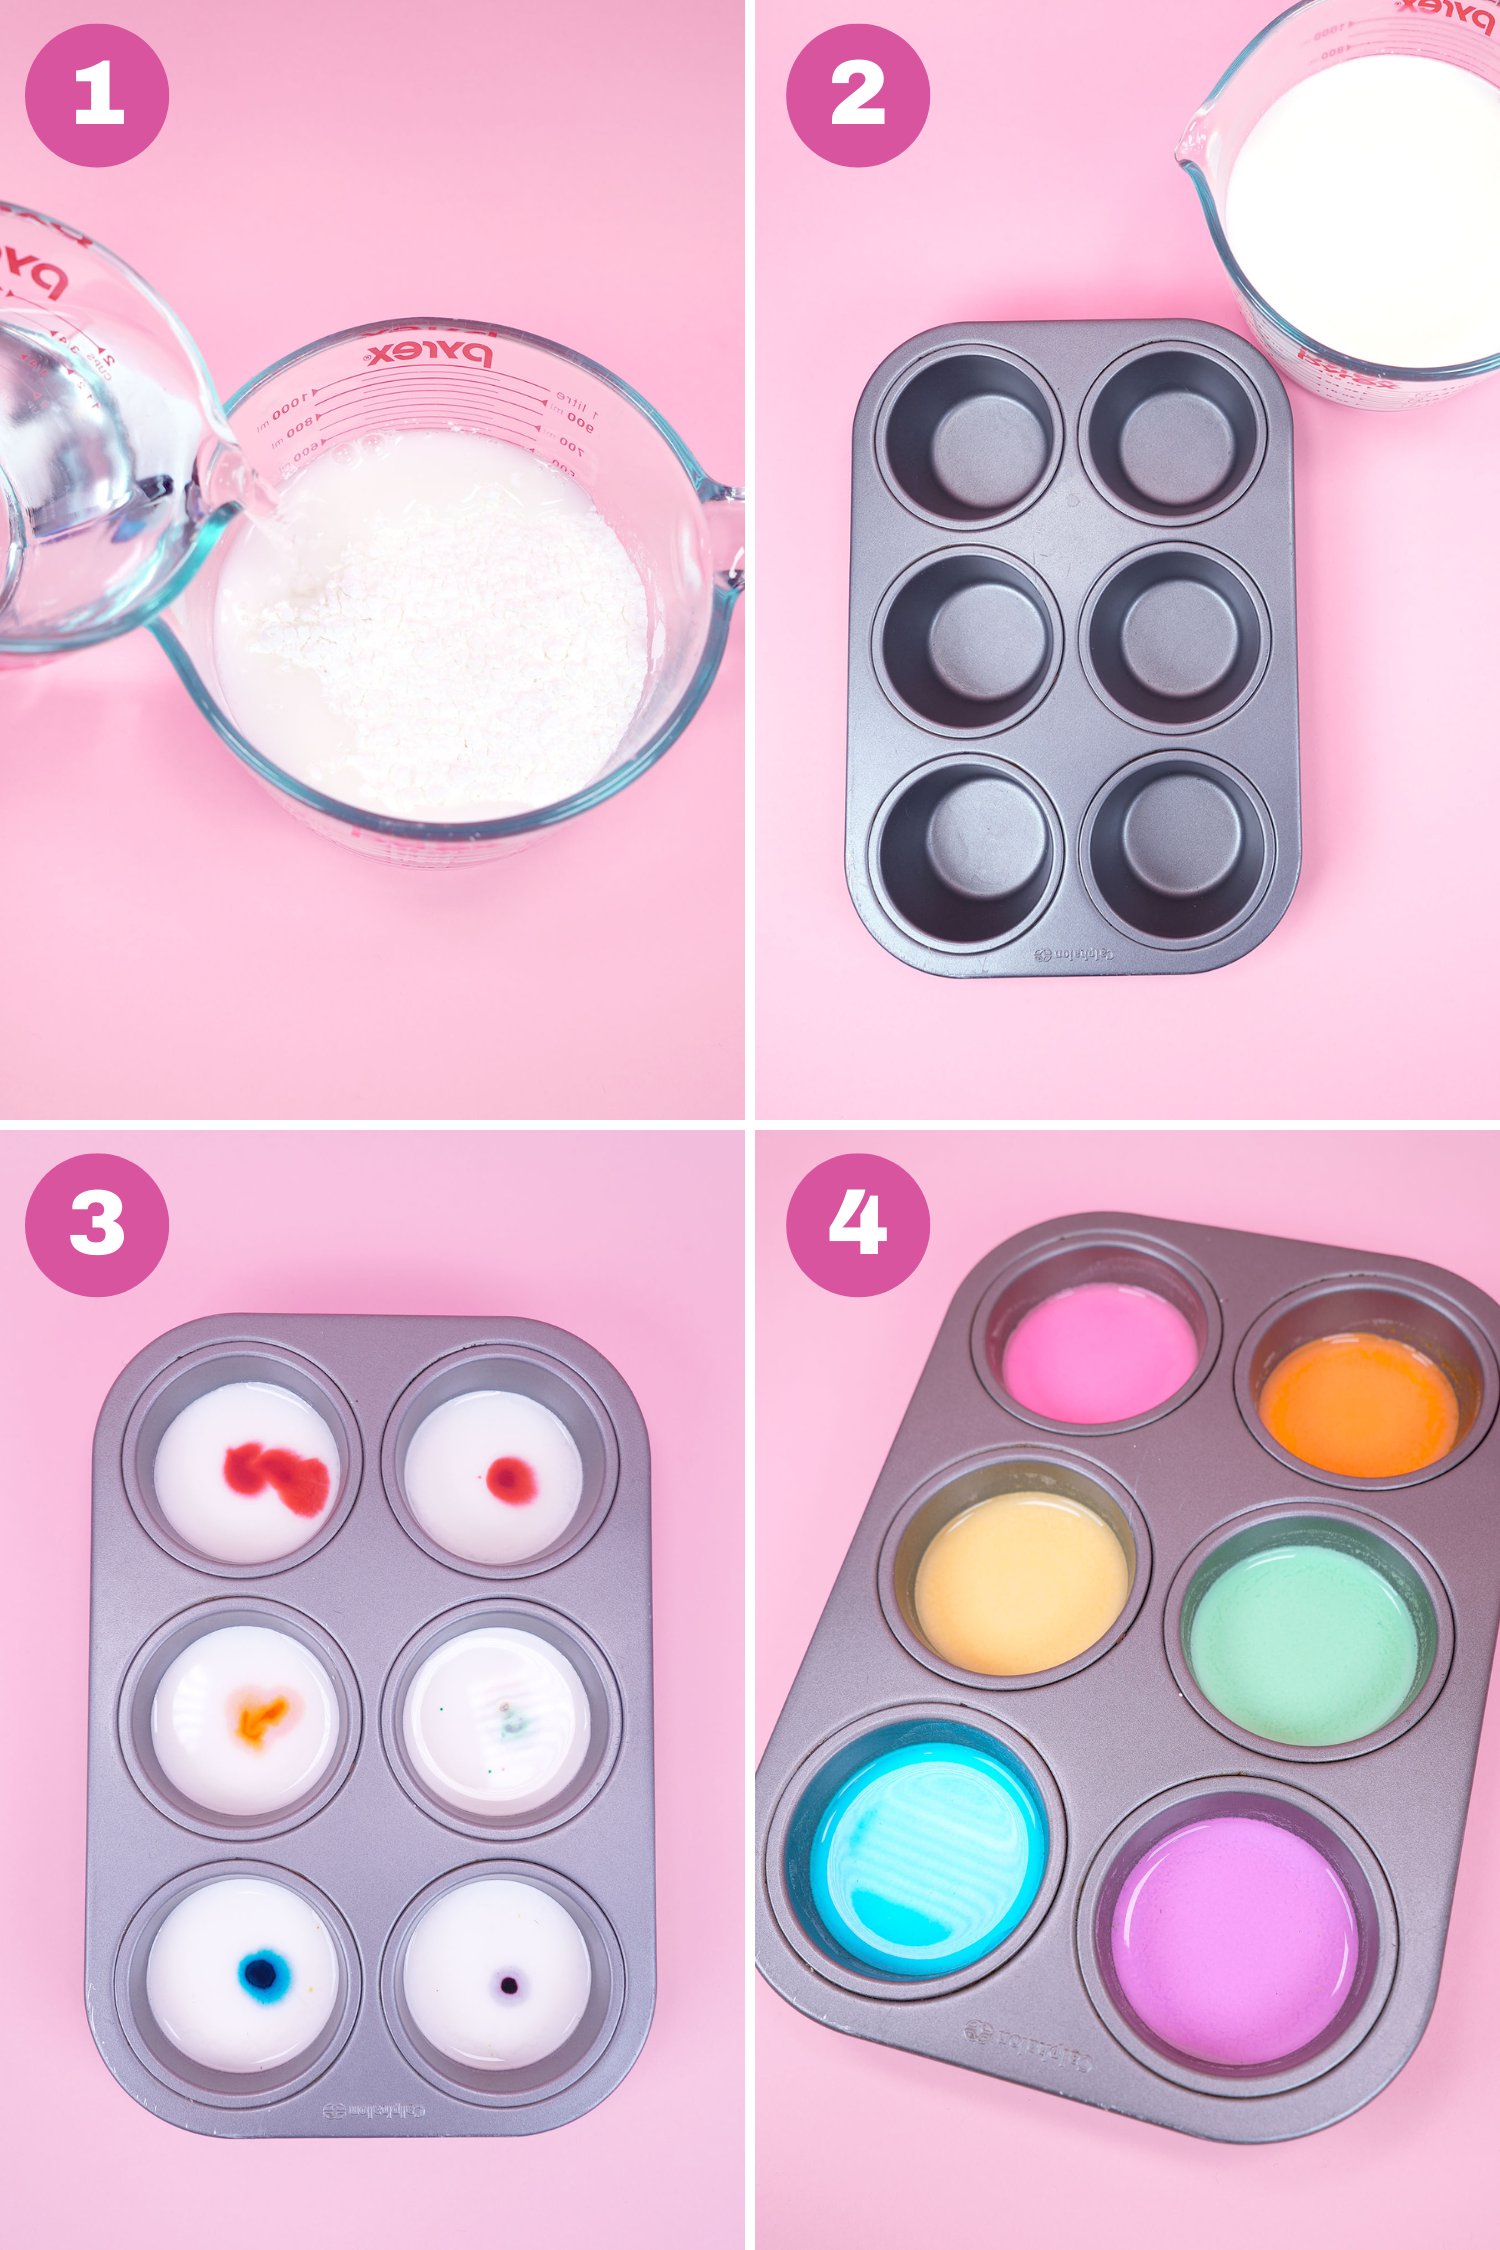 4-step photo tutorial collage image showing the four steps to making DIY sidewalk chalk paint - mix ingredients, divide into muffin tin, add food coloring, and paint